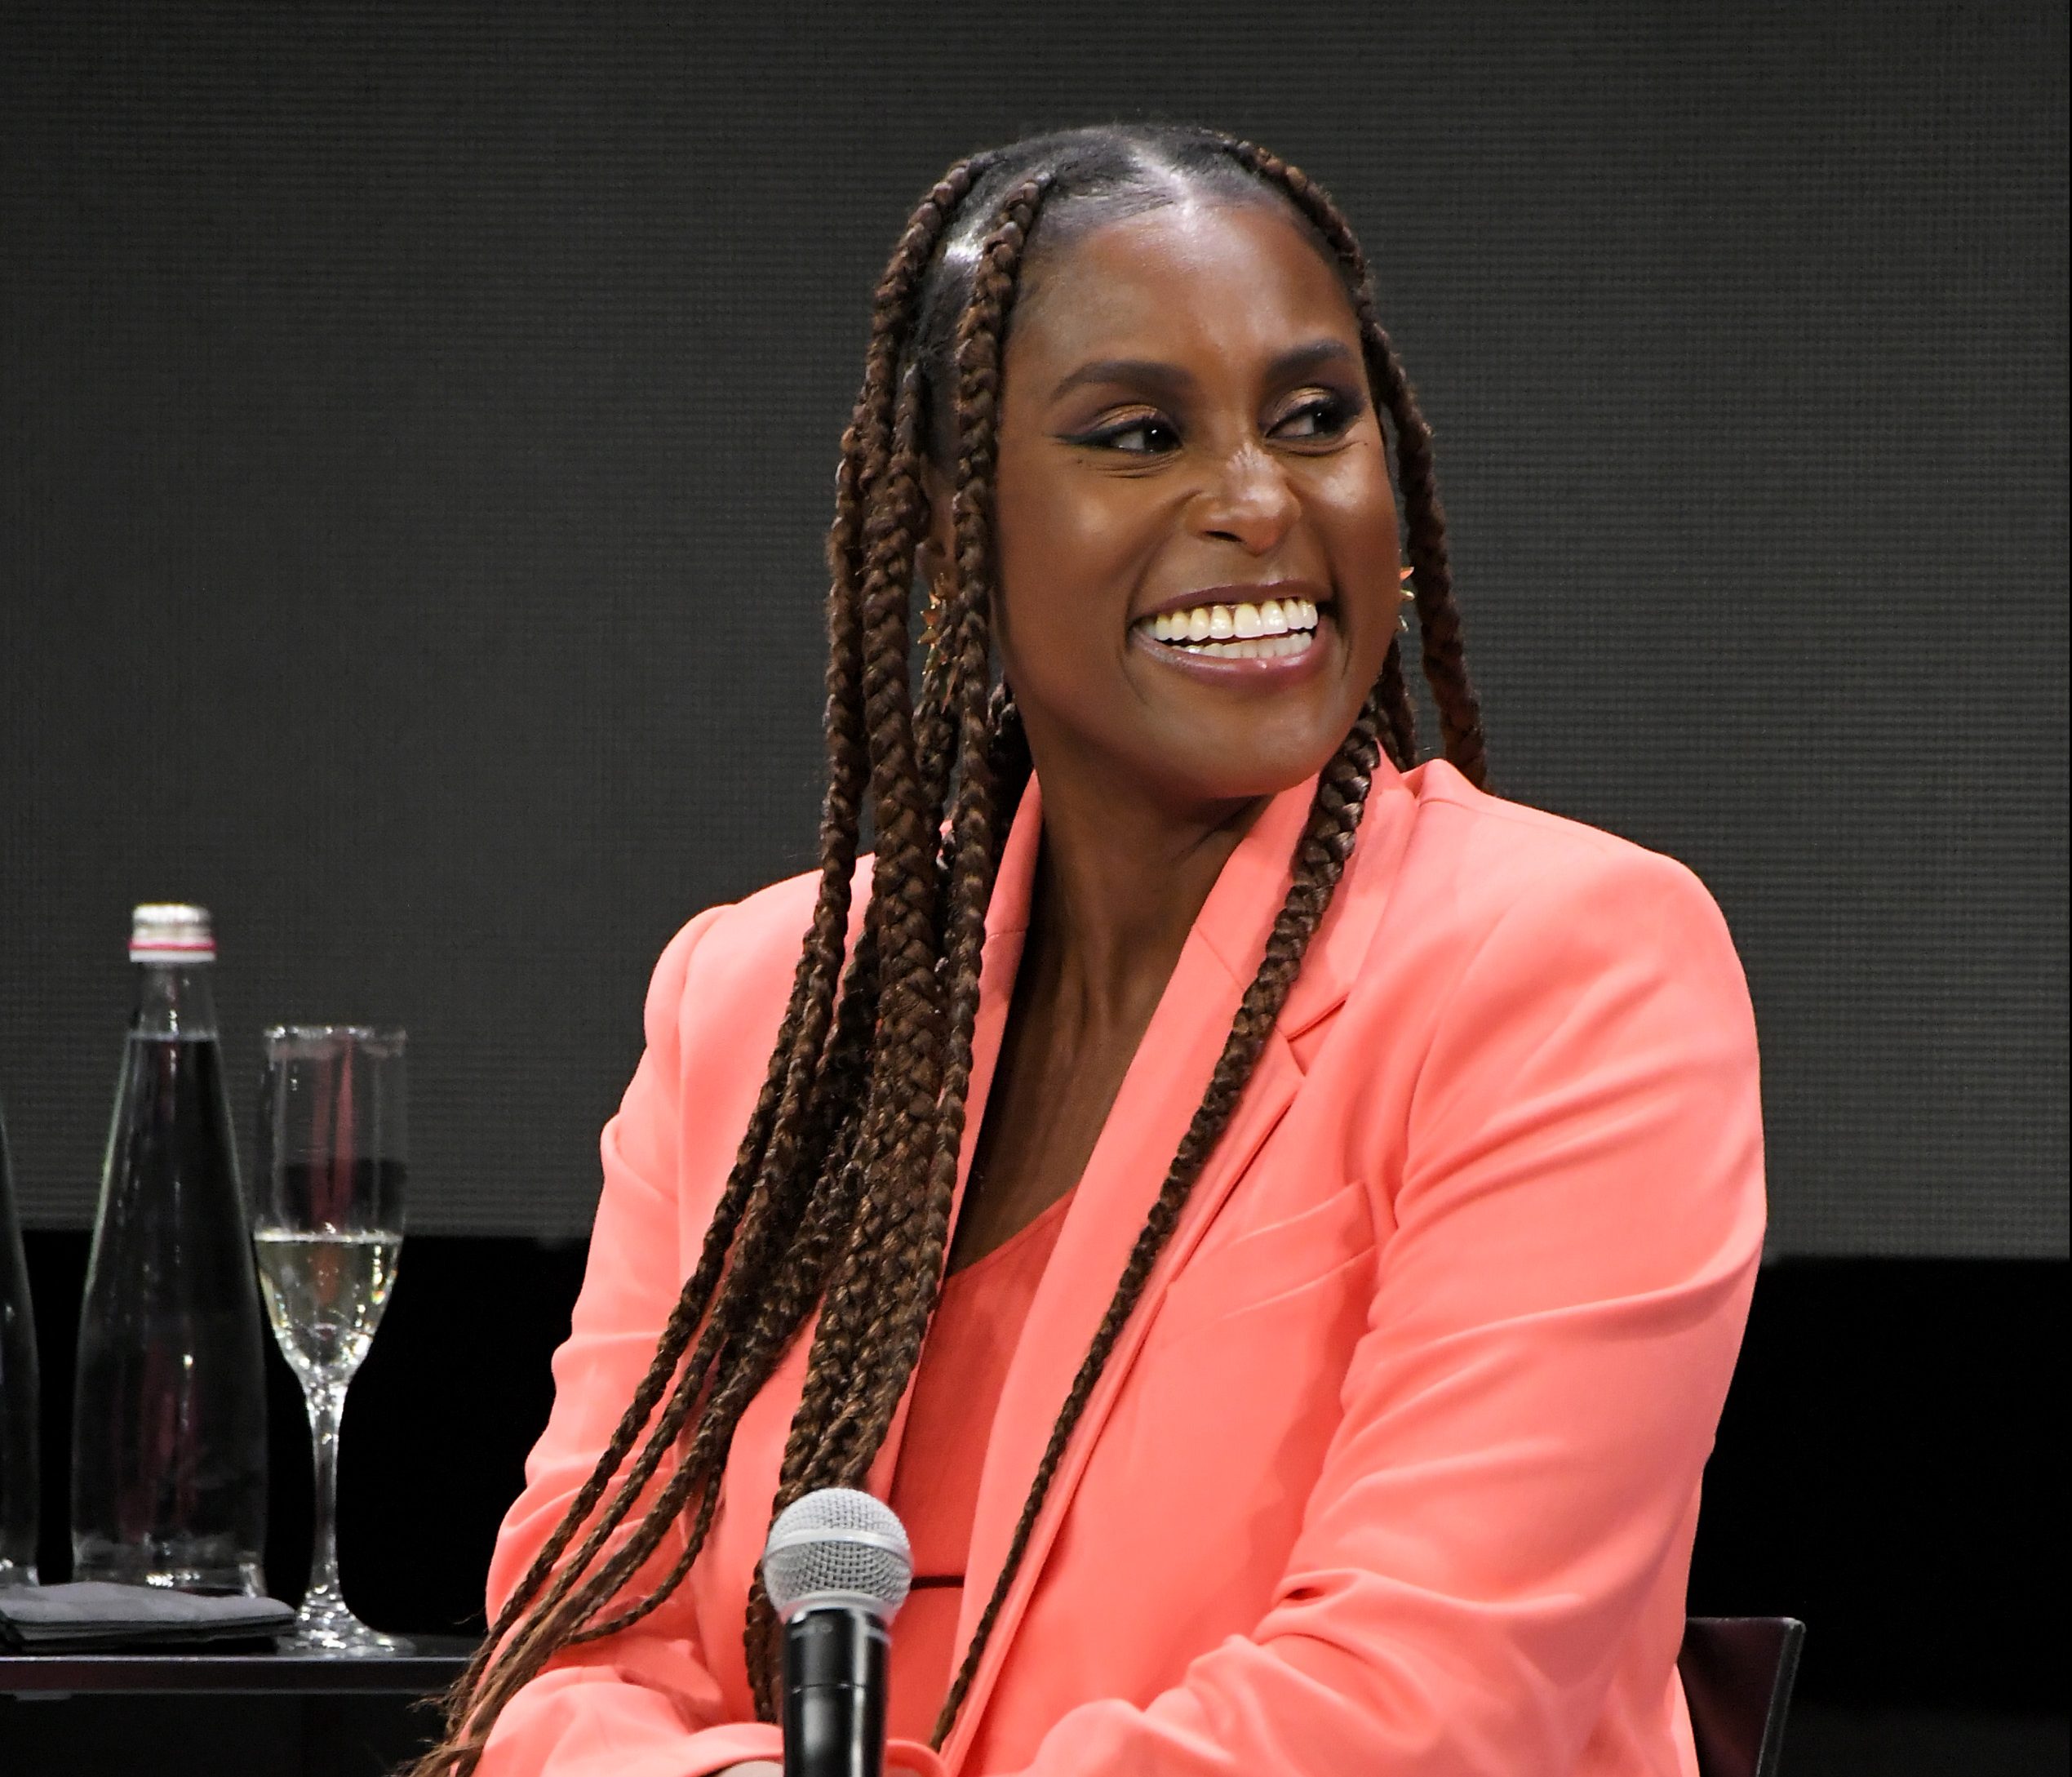 Issa Rae was announced as the recipient of the Visionary Award for the Producers Guild Award for her successful career.